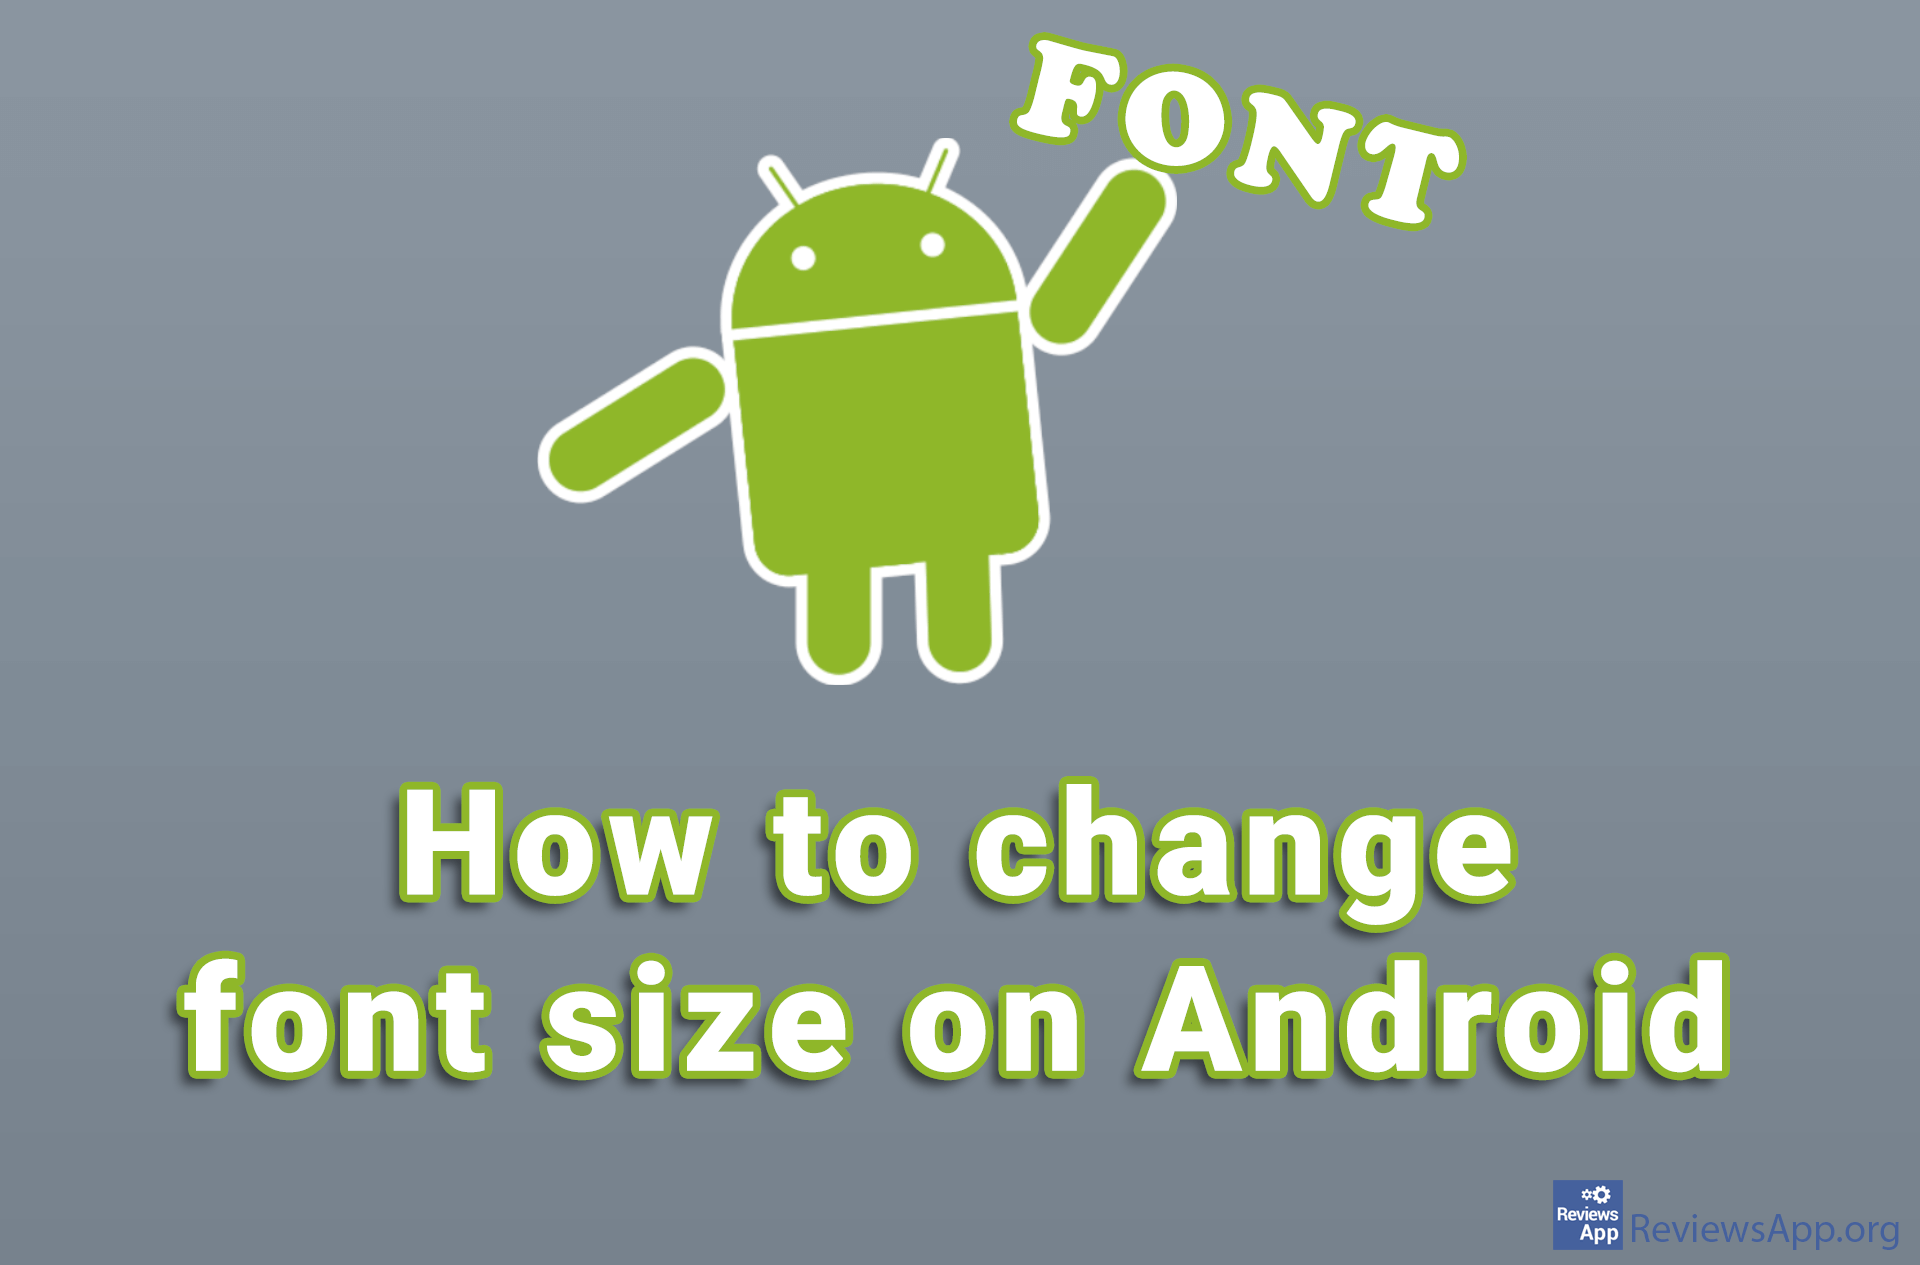 How to change font size on Android